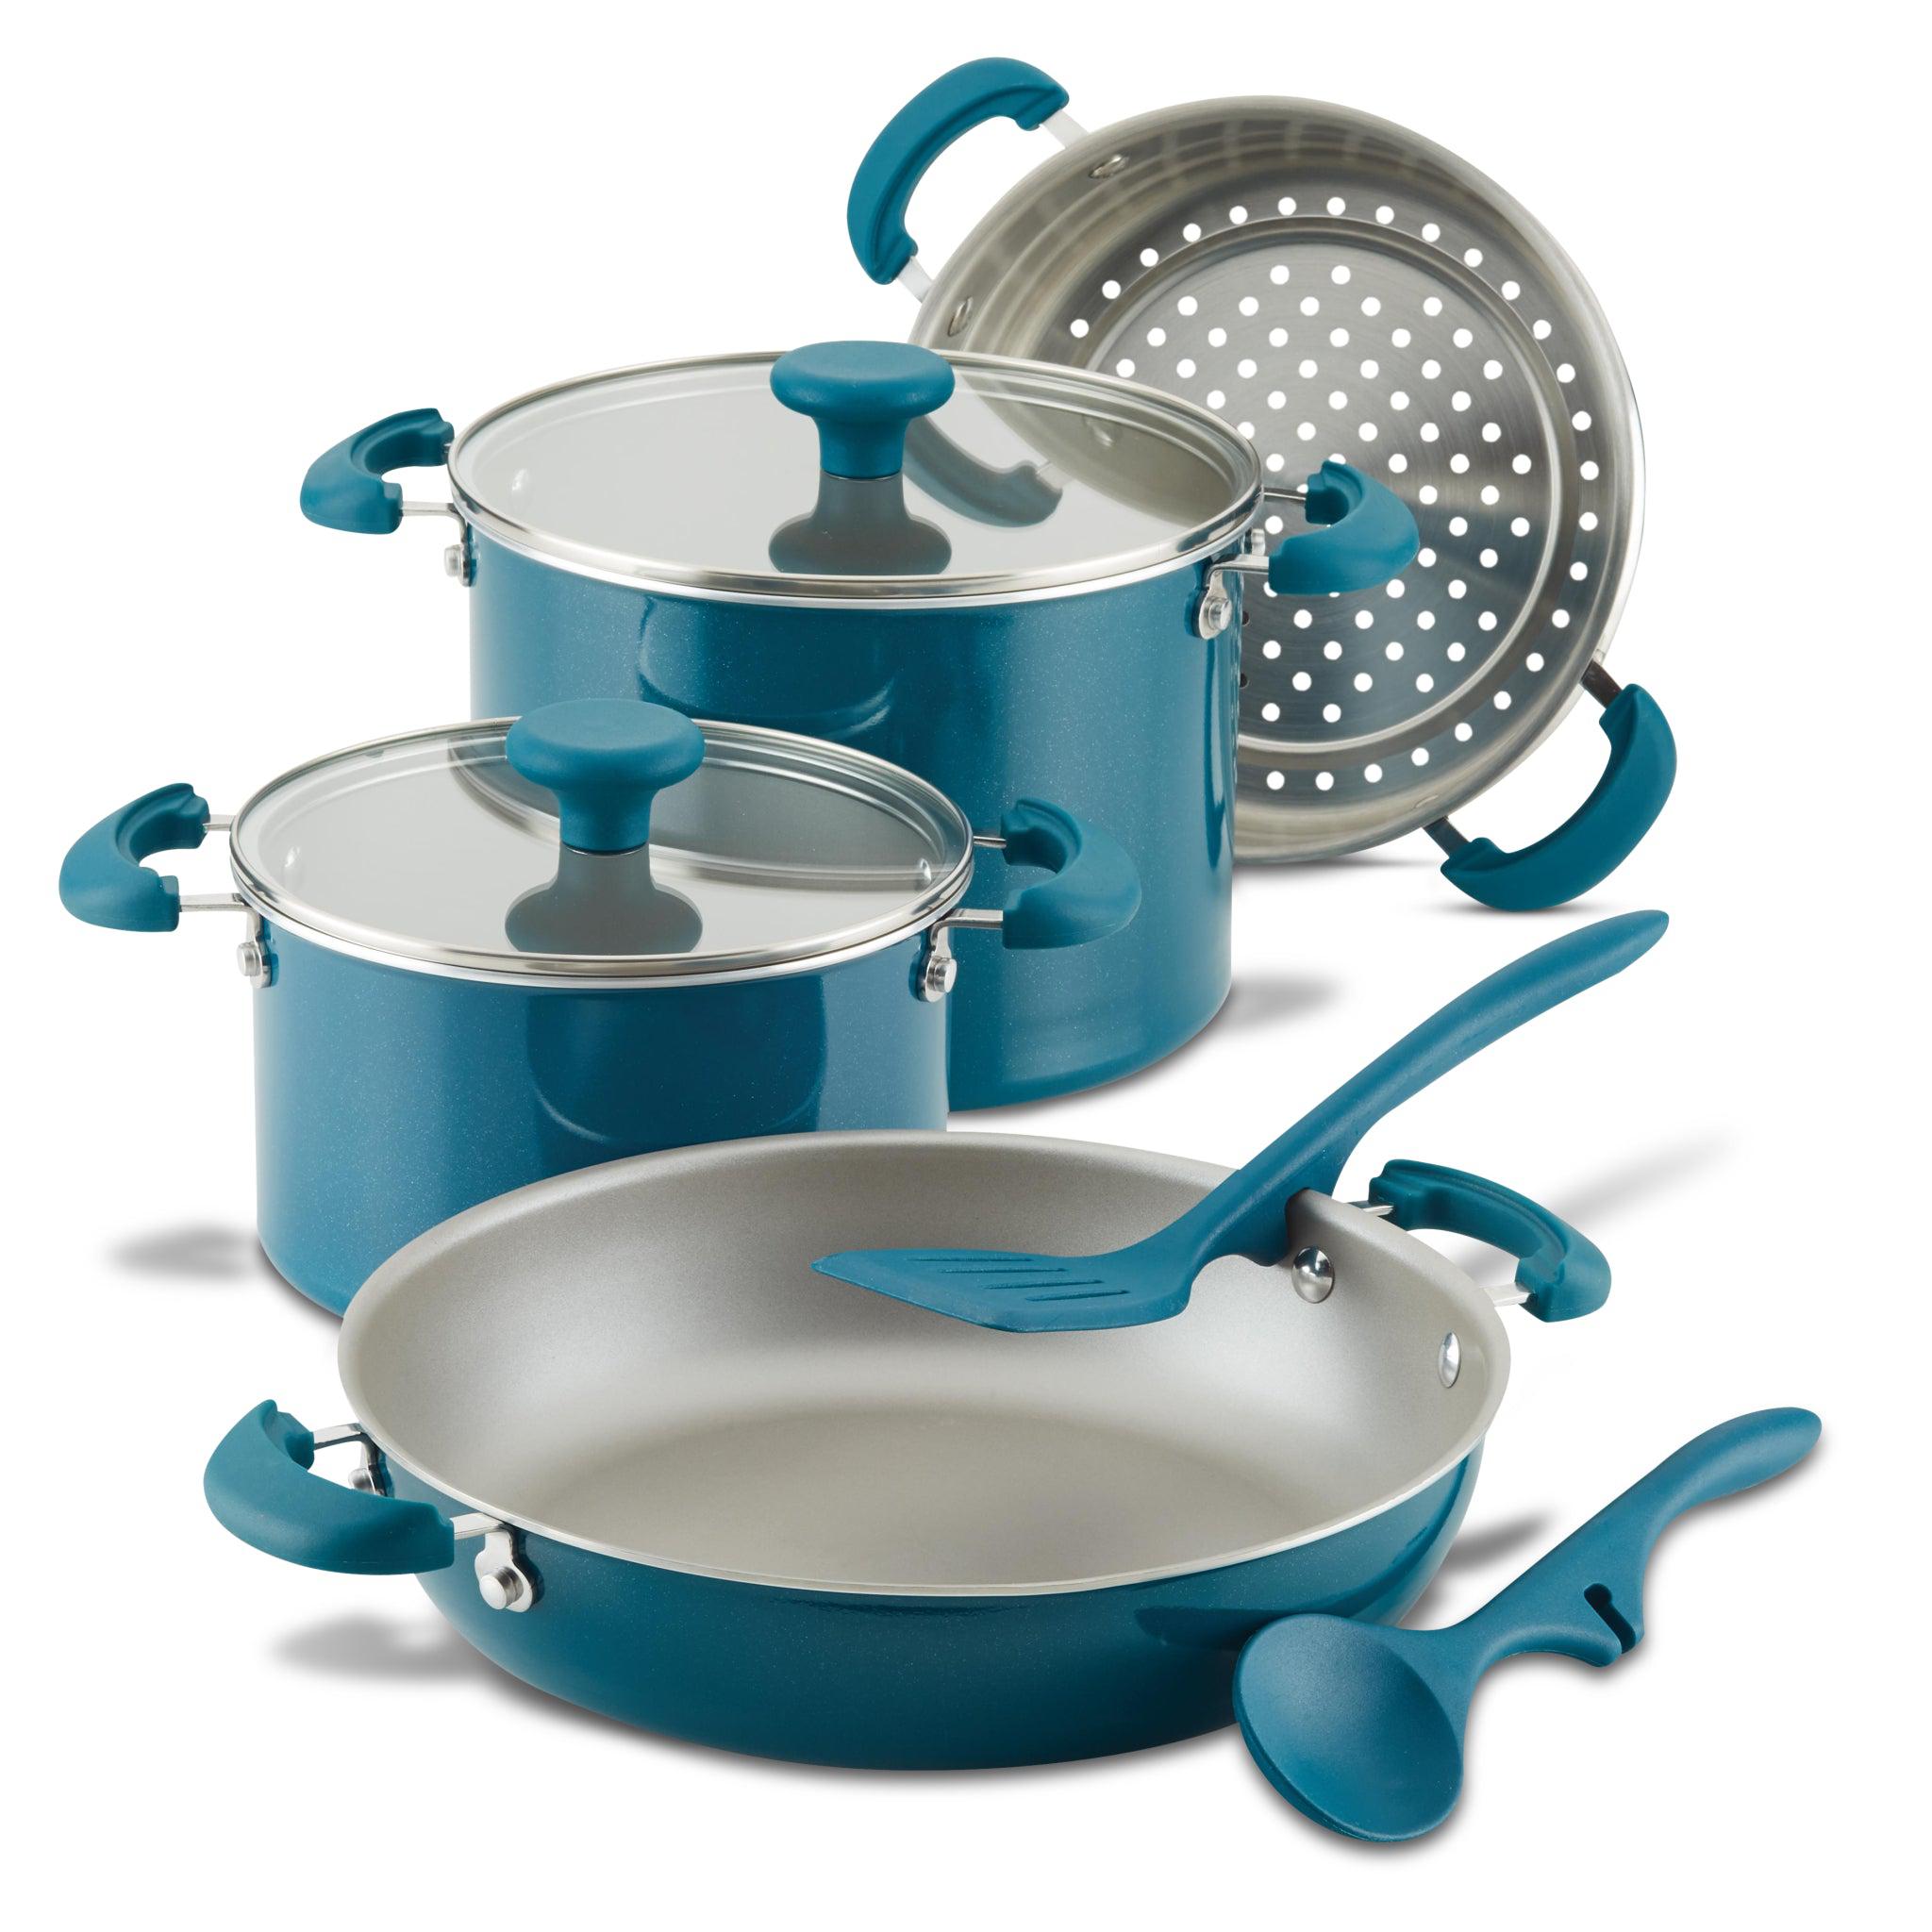 Enter for a Chance to Win: Rachael Ray Create Delicious 11-Pc.  Hard-Anodized Cookware Set